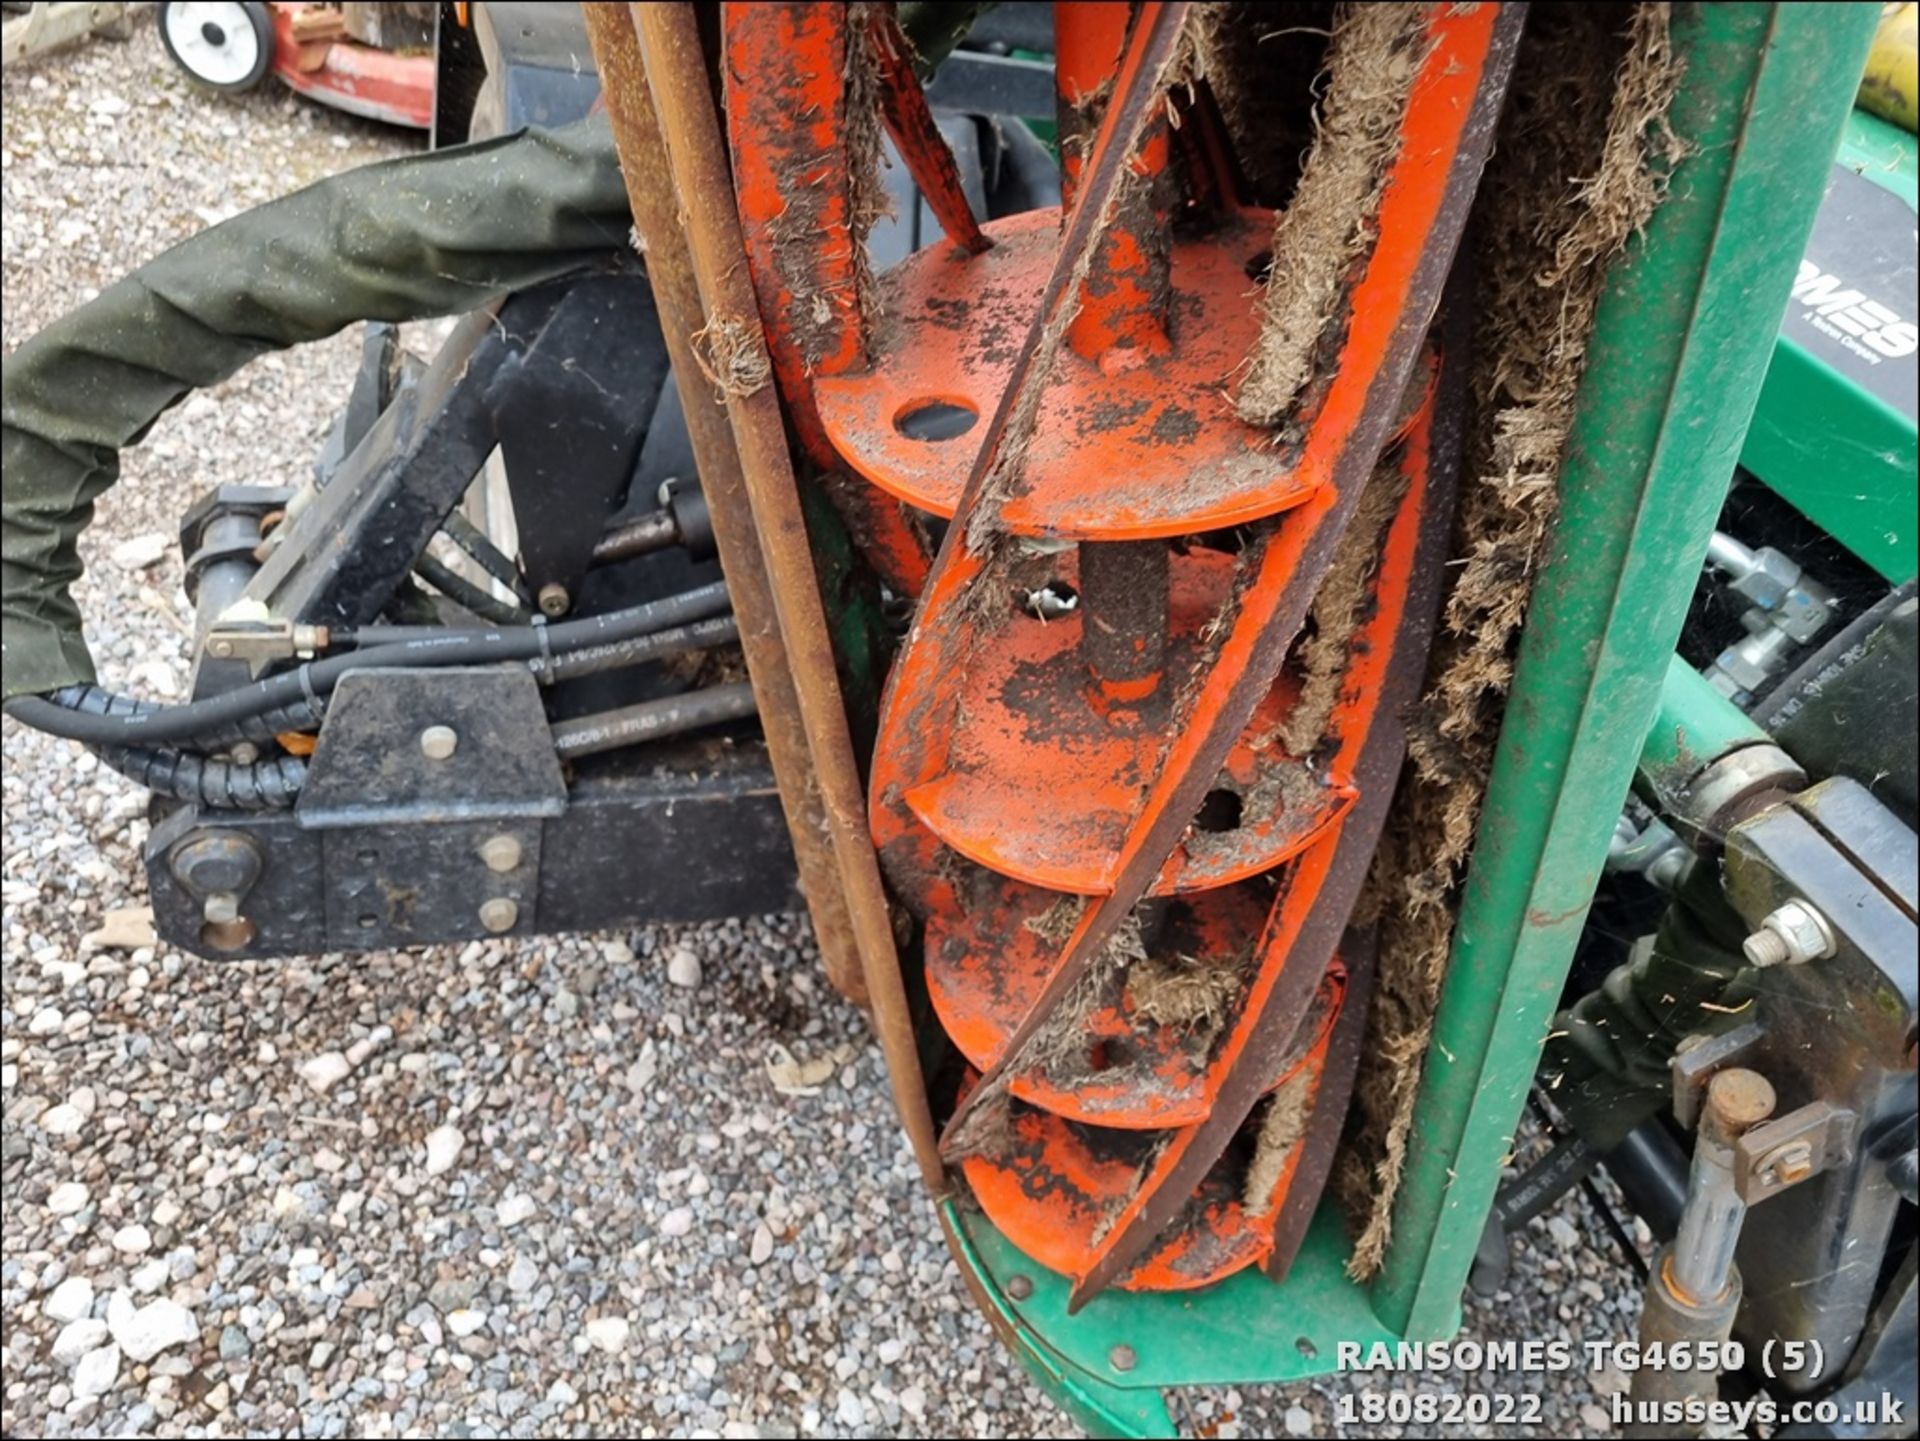 RANSOMES MAGNA 250 TRAILED GANG MOWER - Image 9 of 19